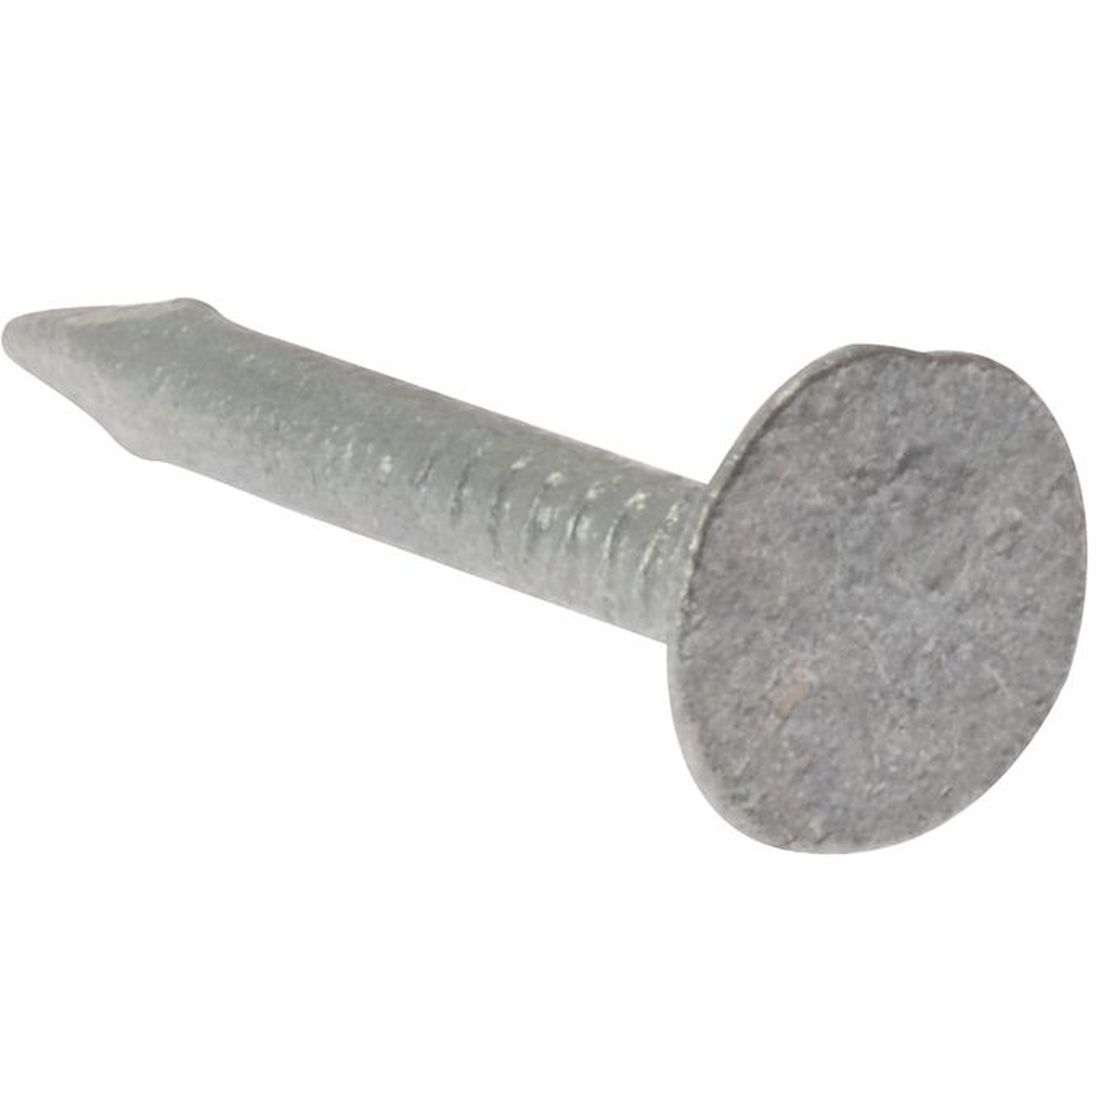 ForgeFix Clout Nail Extra Large Head Galvanised 25mm (2.5kg Bag)                         